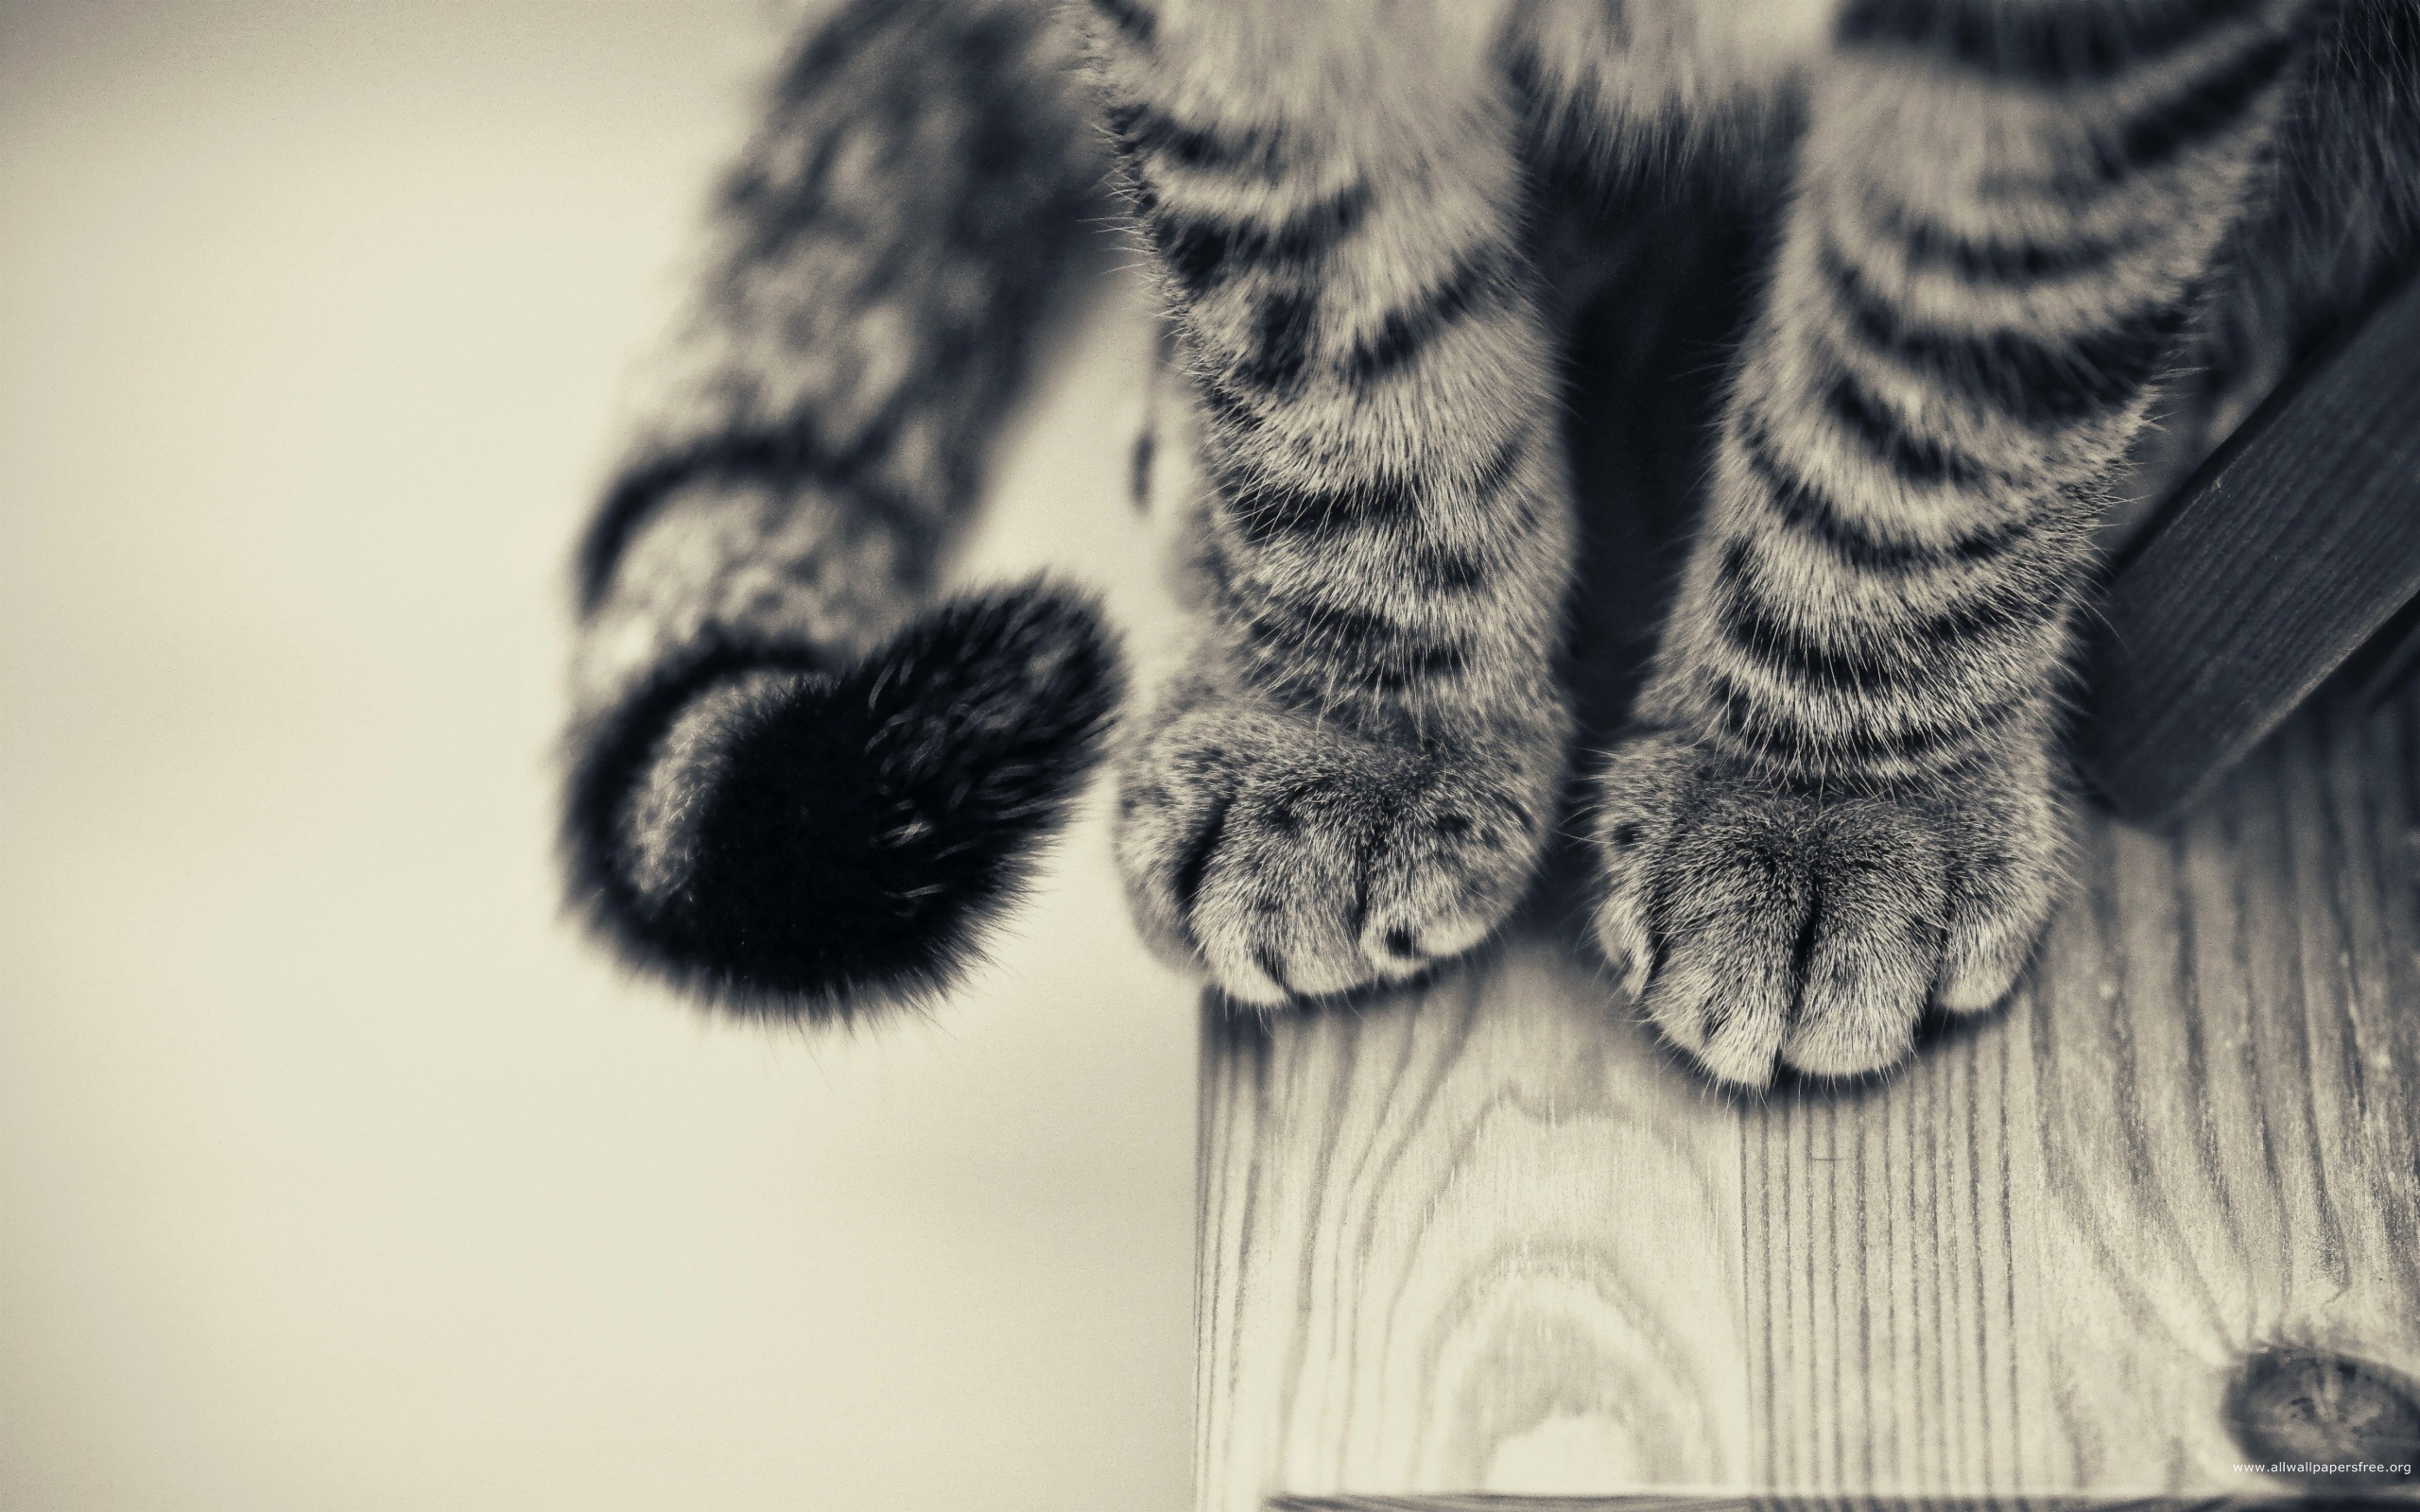 General 2560x1600 cats paws monochrome animals wooden surface mammals